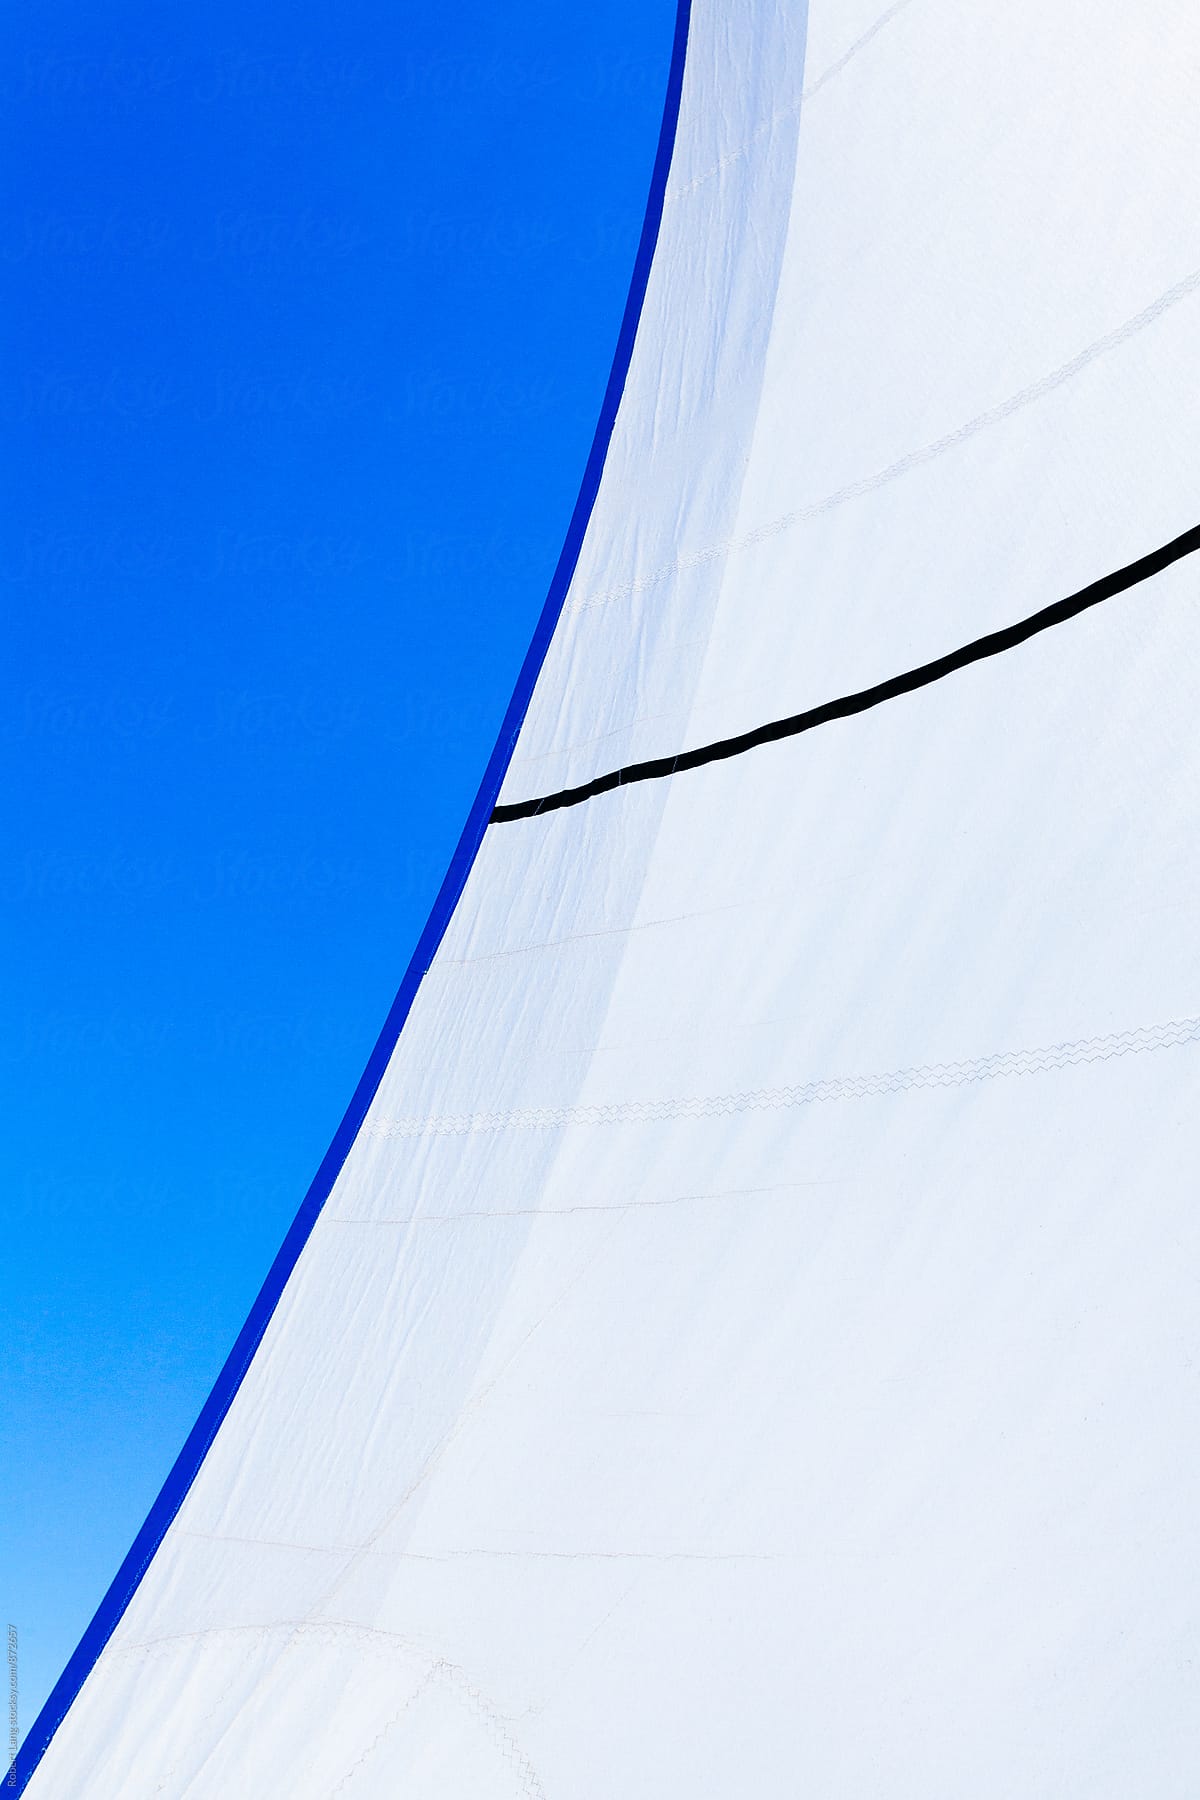 White sails on a blue sky day